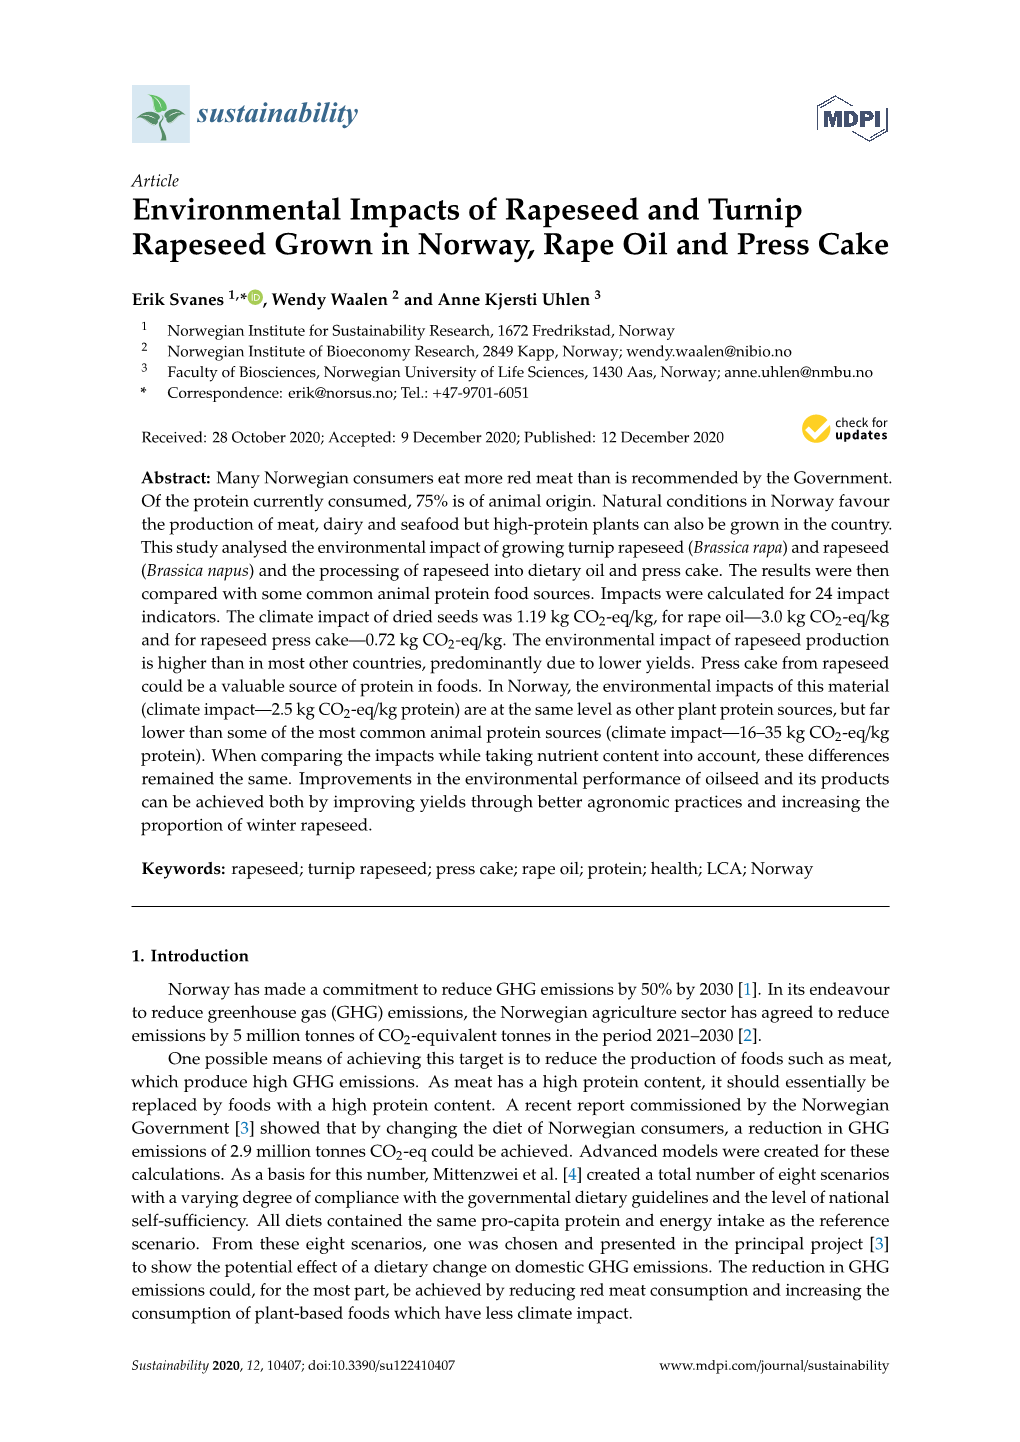 Environmental Impacts of Rapeseed and Turnip Rapeseed Grown in Norway, Rape Oil and Press Cake